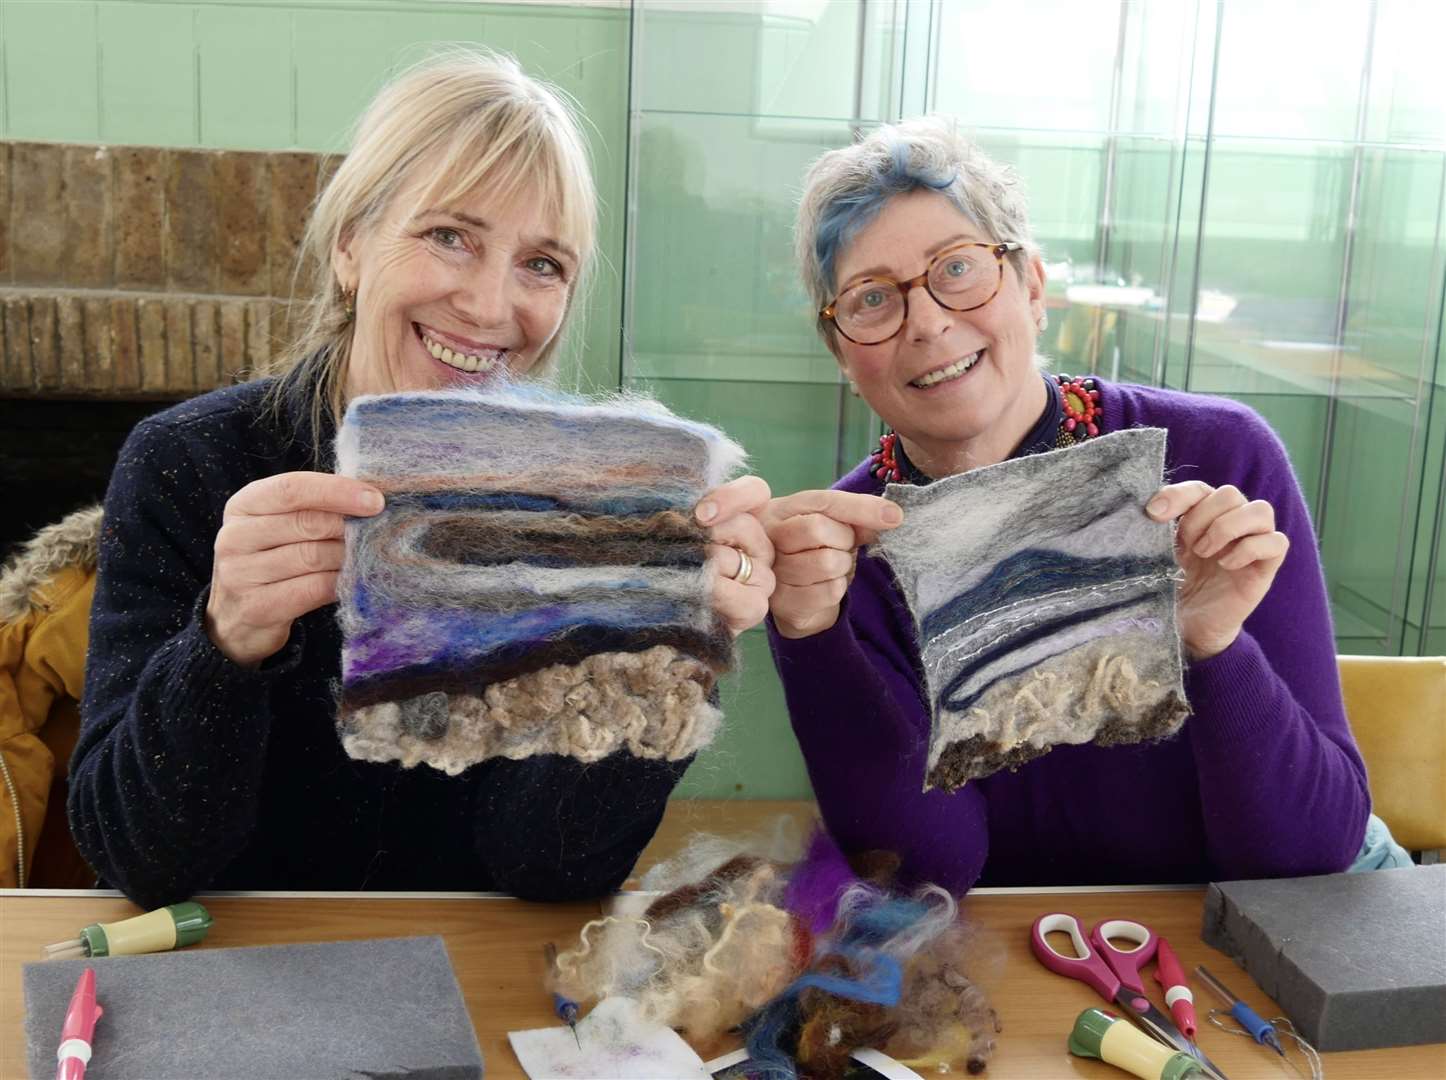 Fay Smith and Julieann Fullerton took home beautiful textile pieces that they created at the needle felting class, taken by tutor Catherine Jones. Picture: Peter Wild